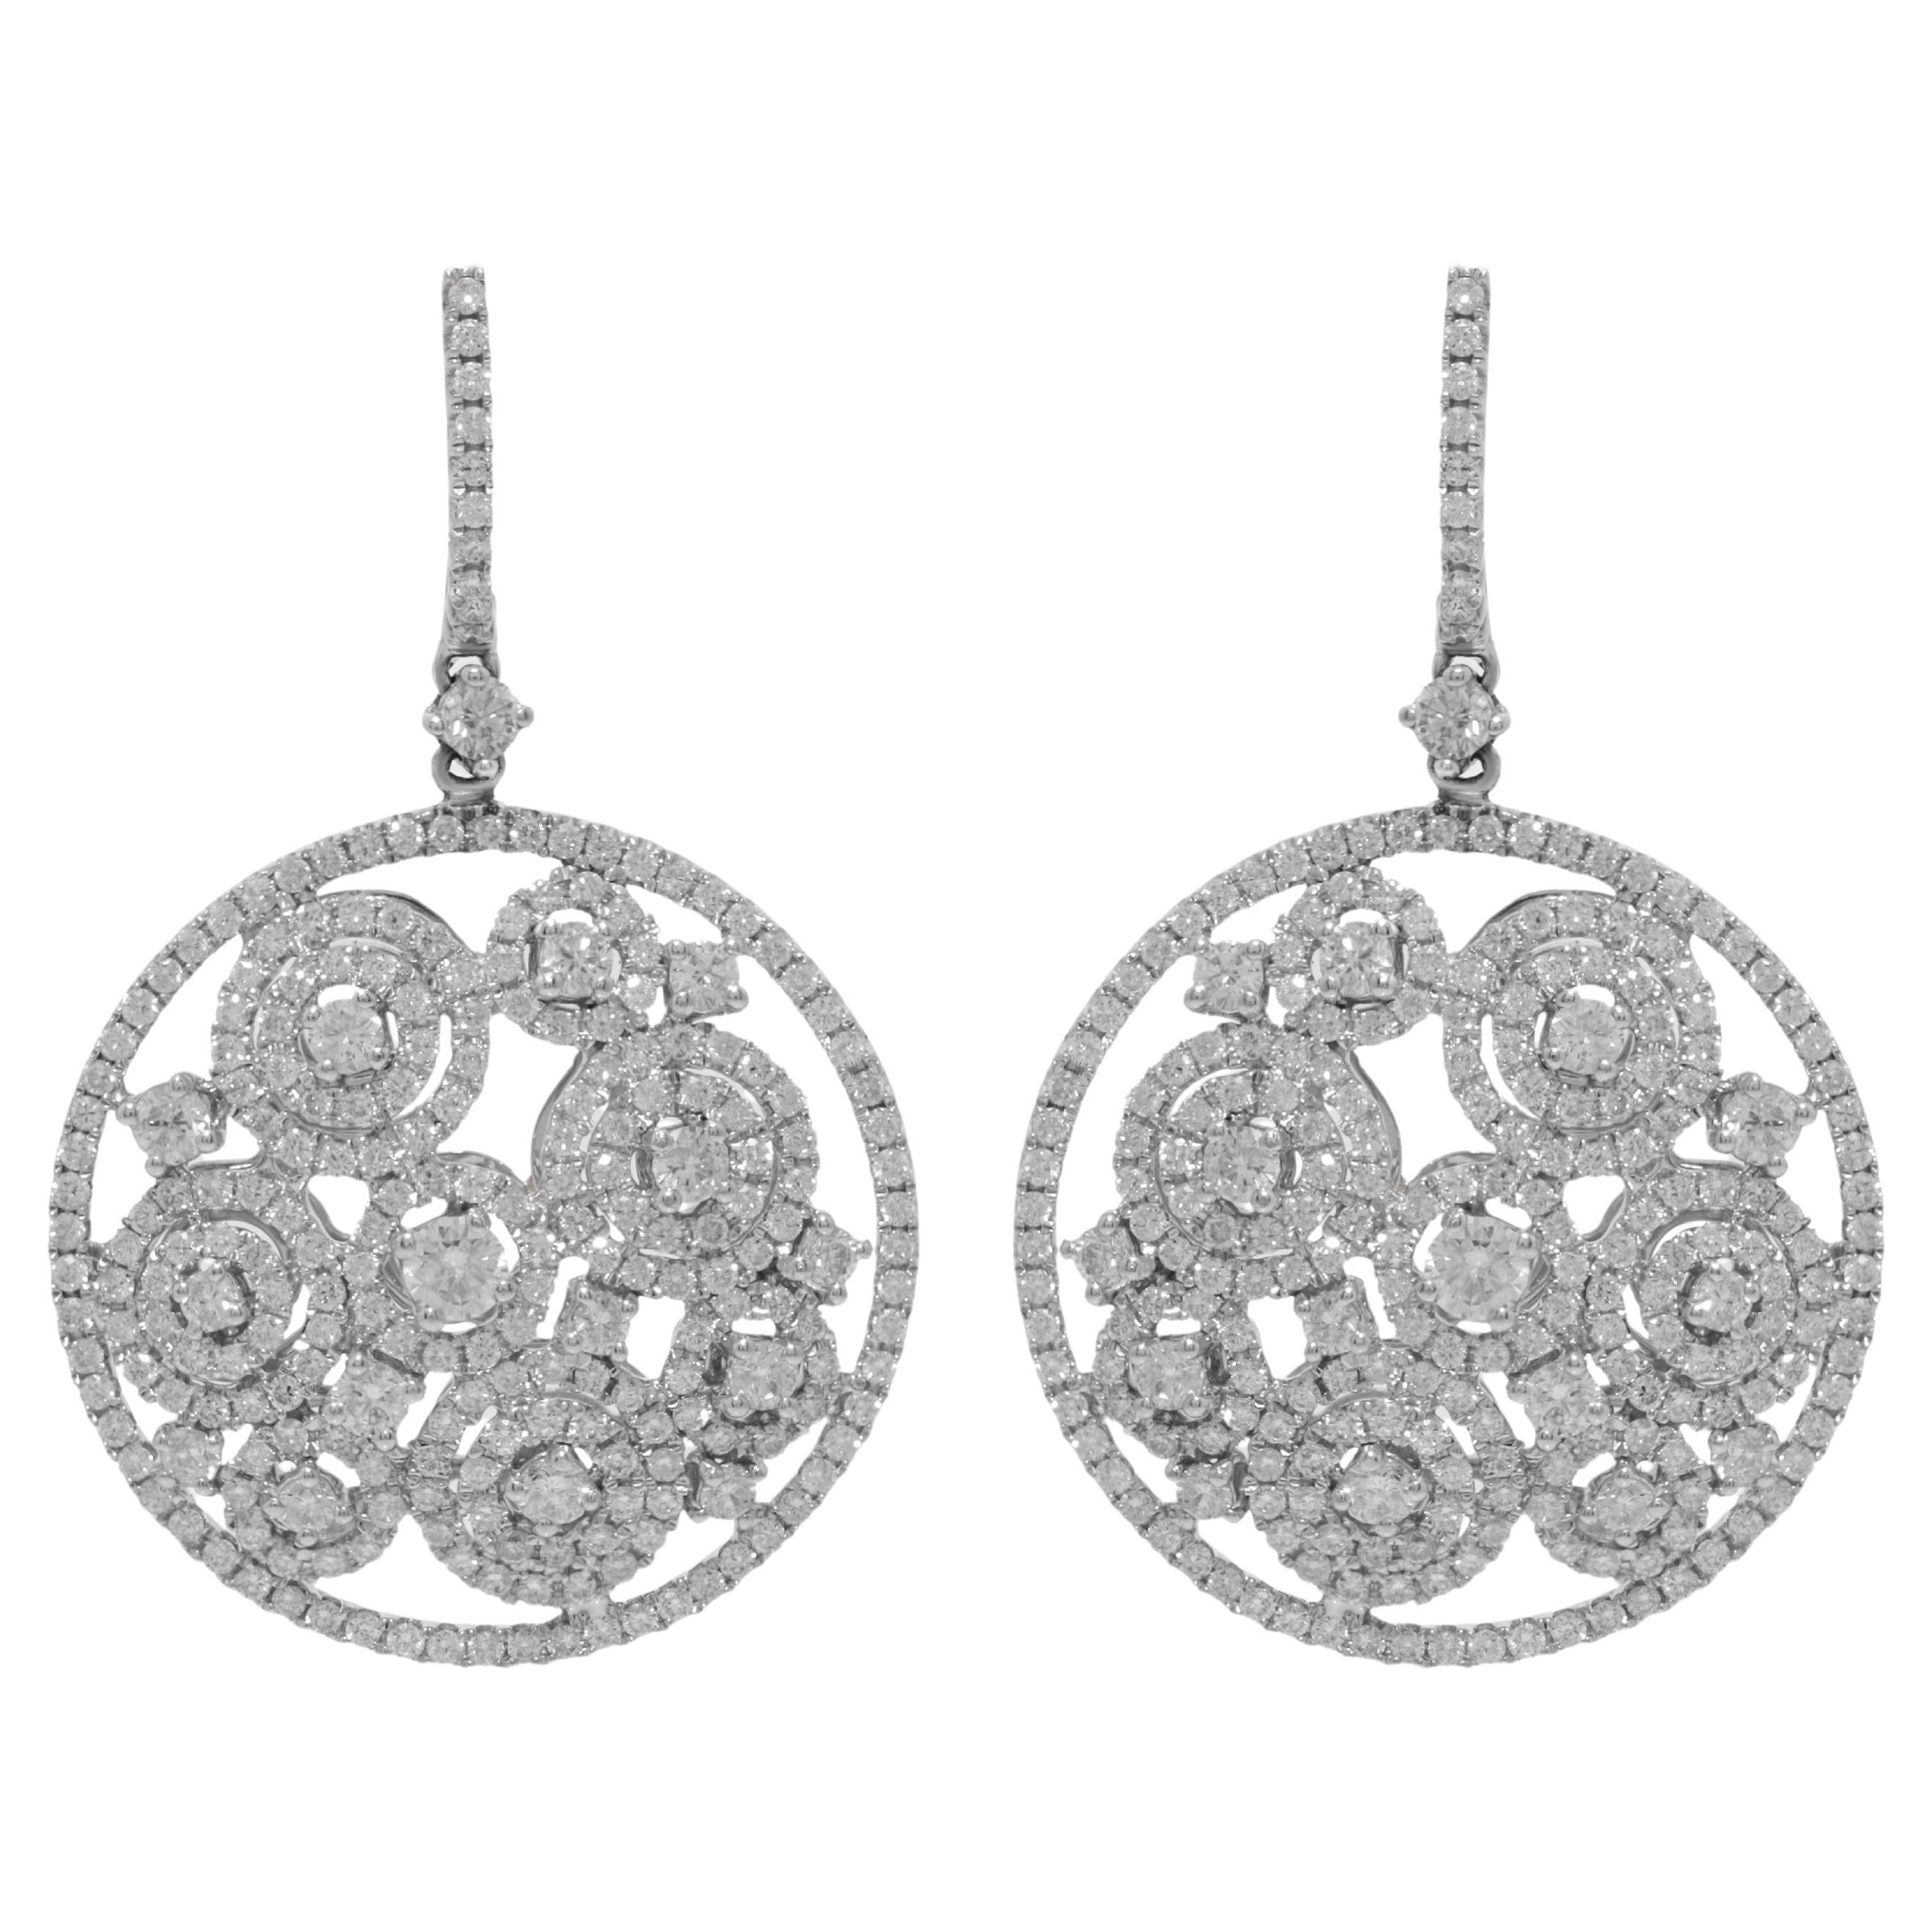 Diana M. 18 kt white gold multicircle earrings adorned with 4.18 cts 